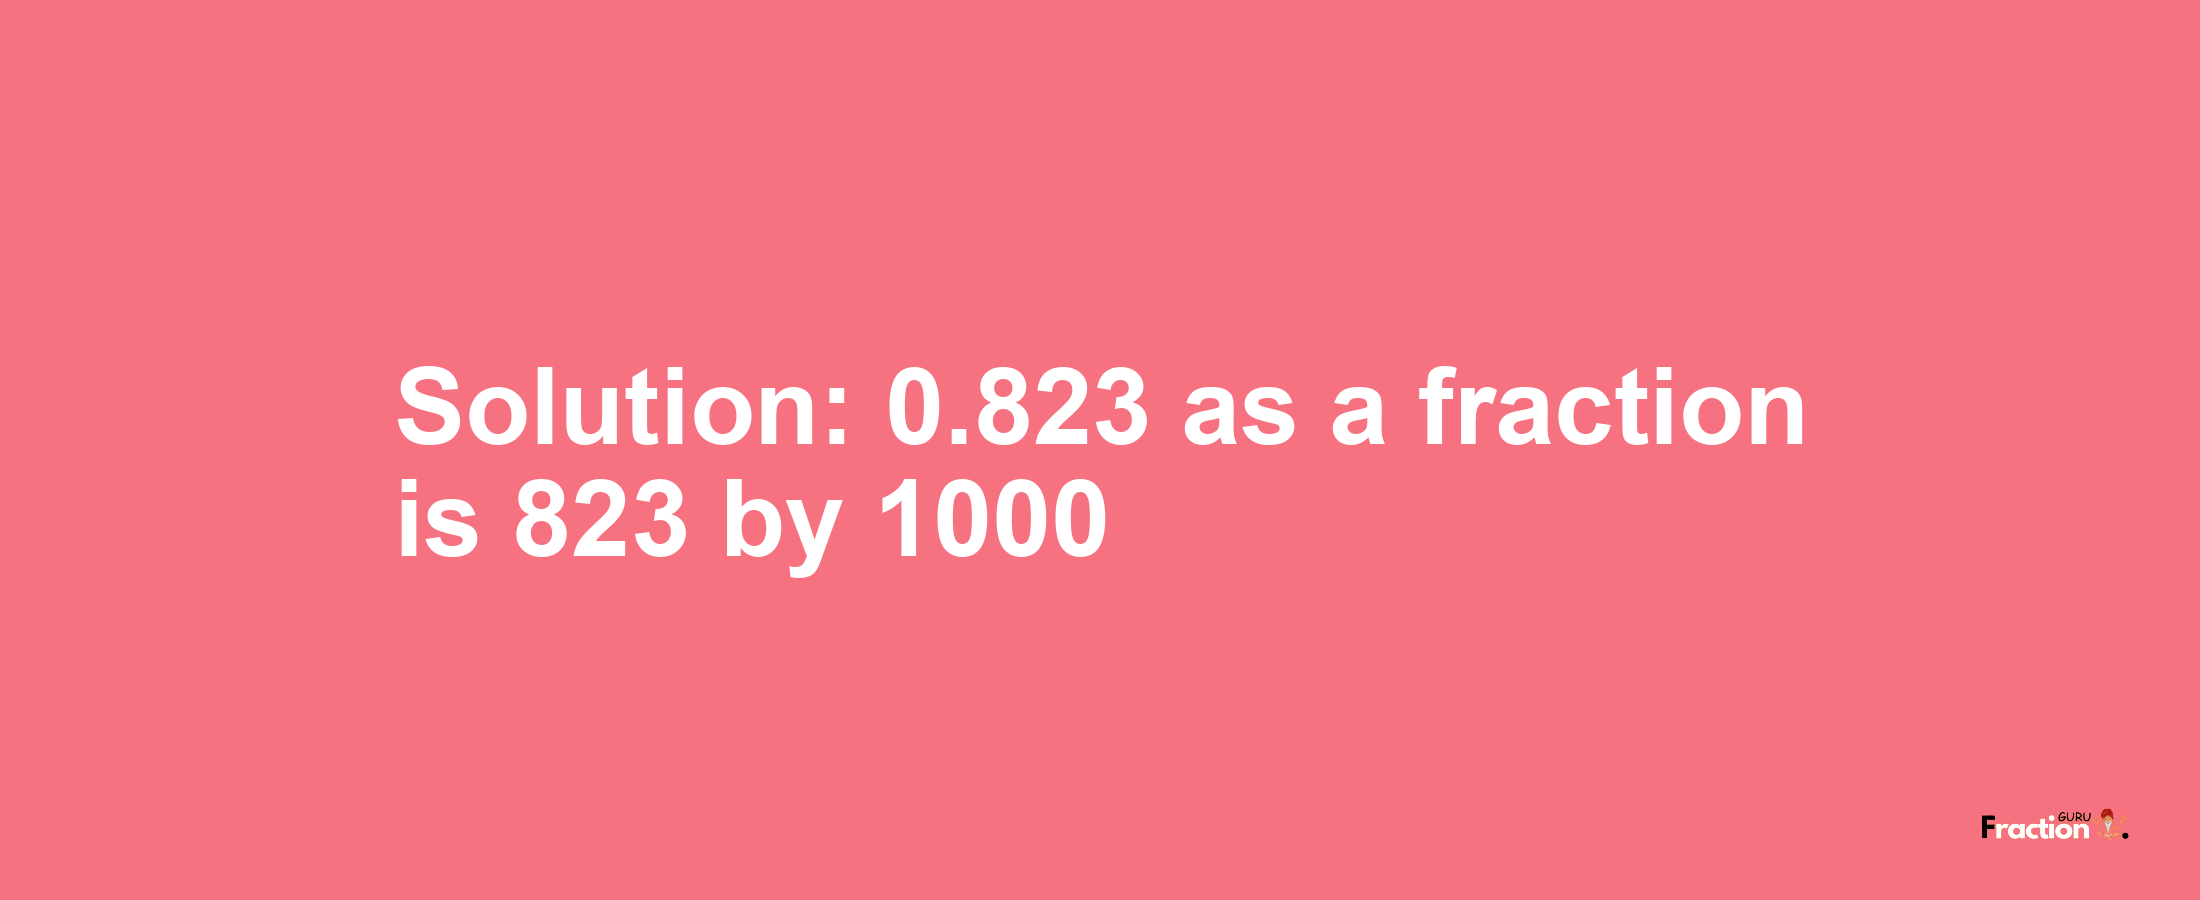 Solution:0.823 as a fraction is 823/1000